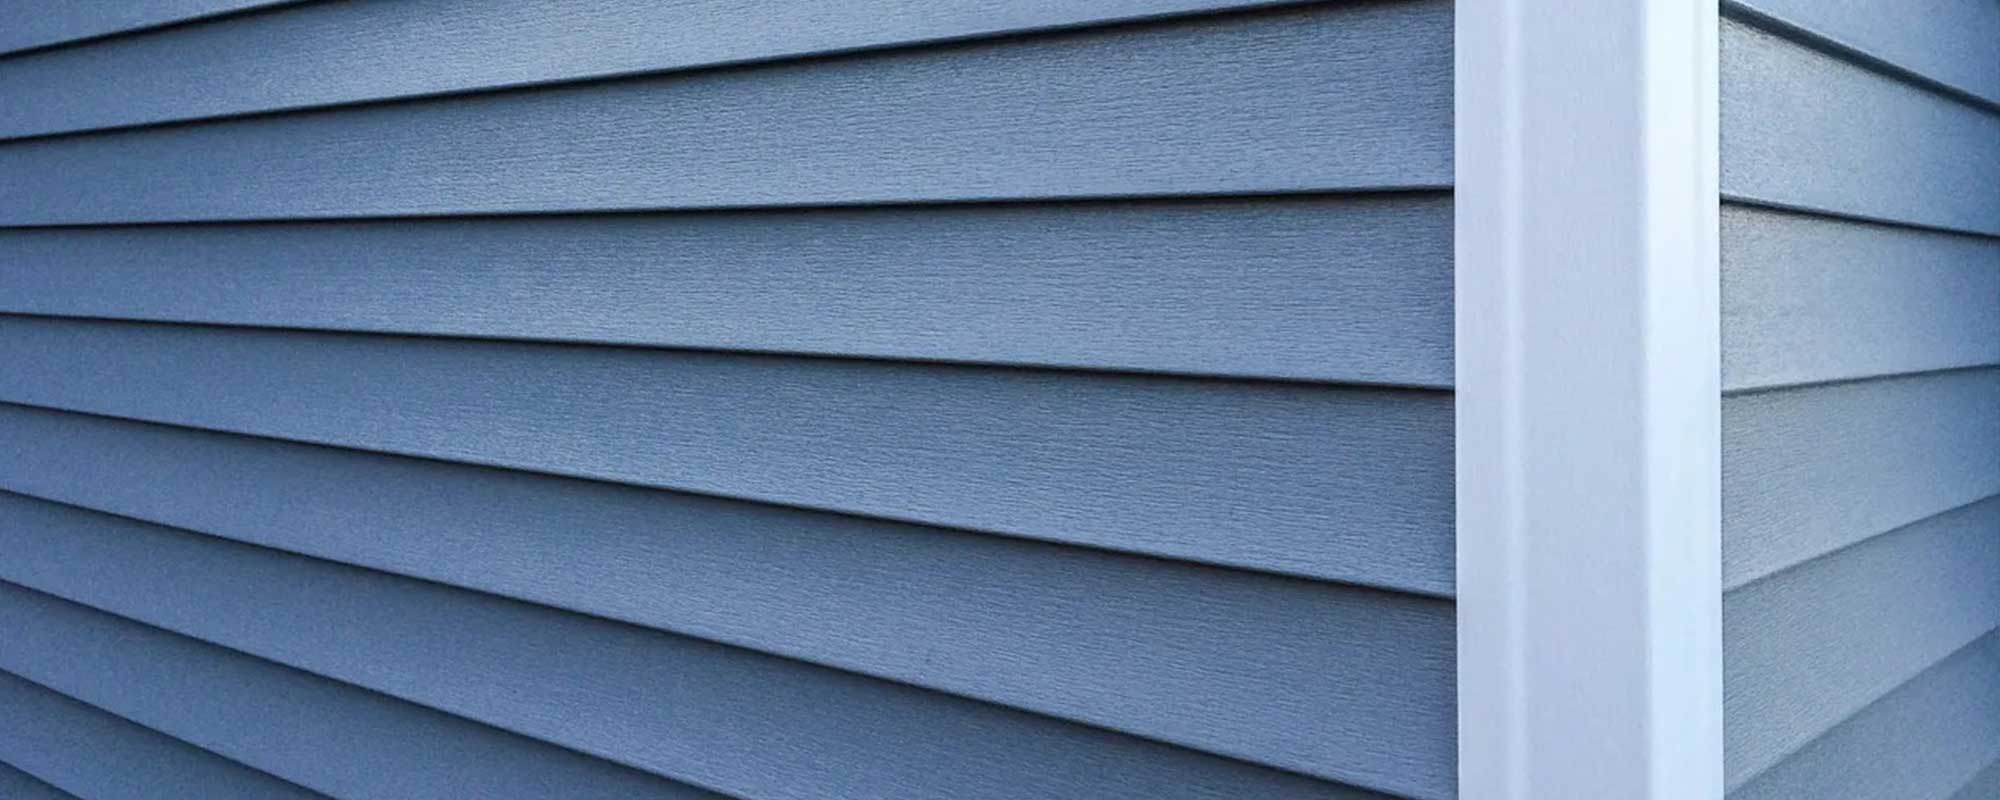 Trusted Siding Installation Company North Jersey